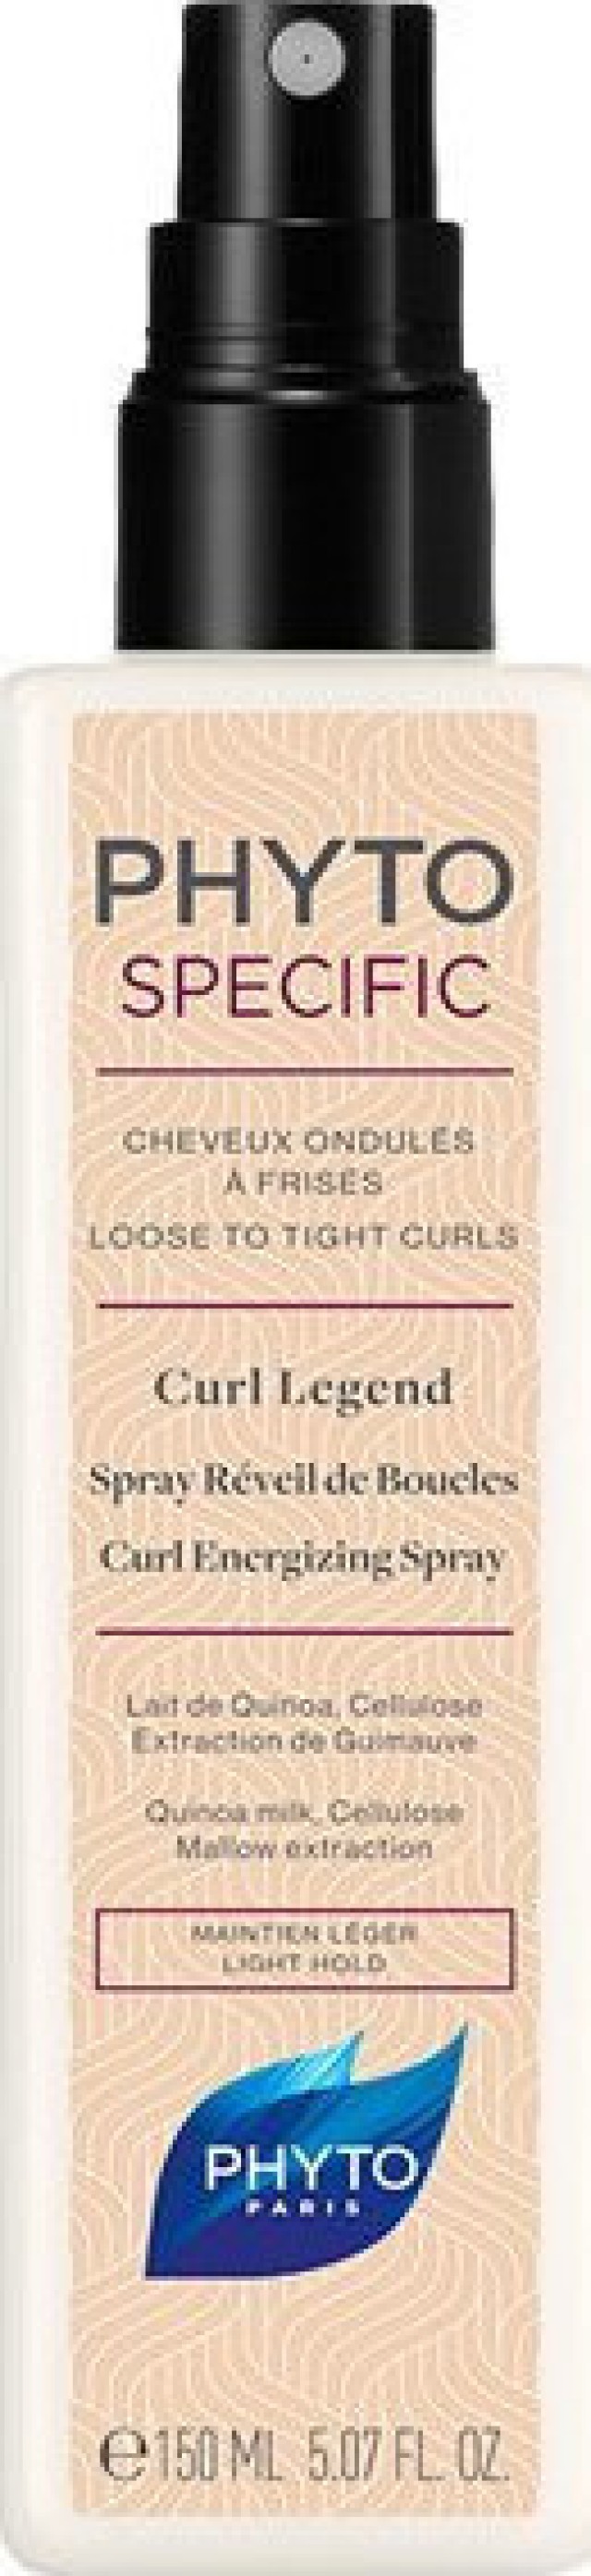 Phyto - Specific Curl Energizing Spray 150ml